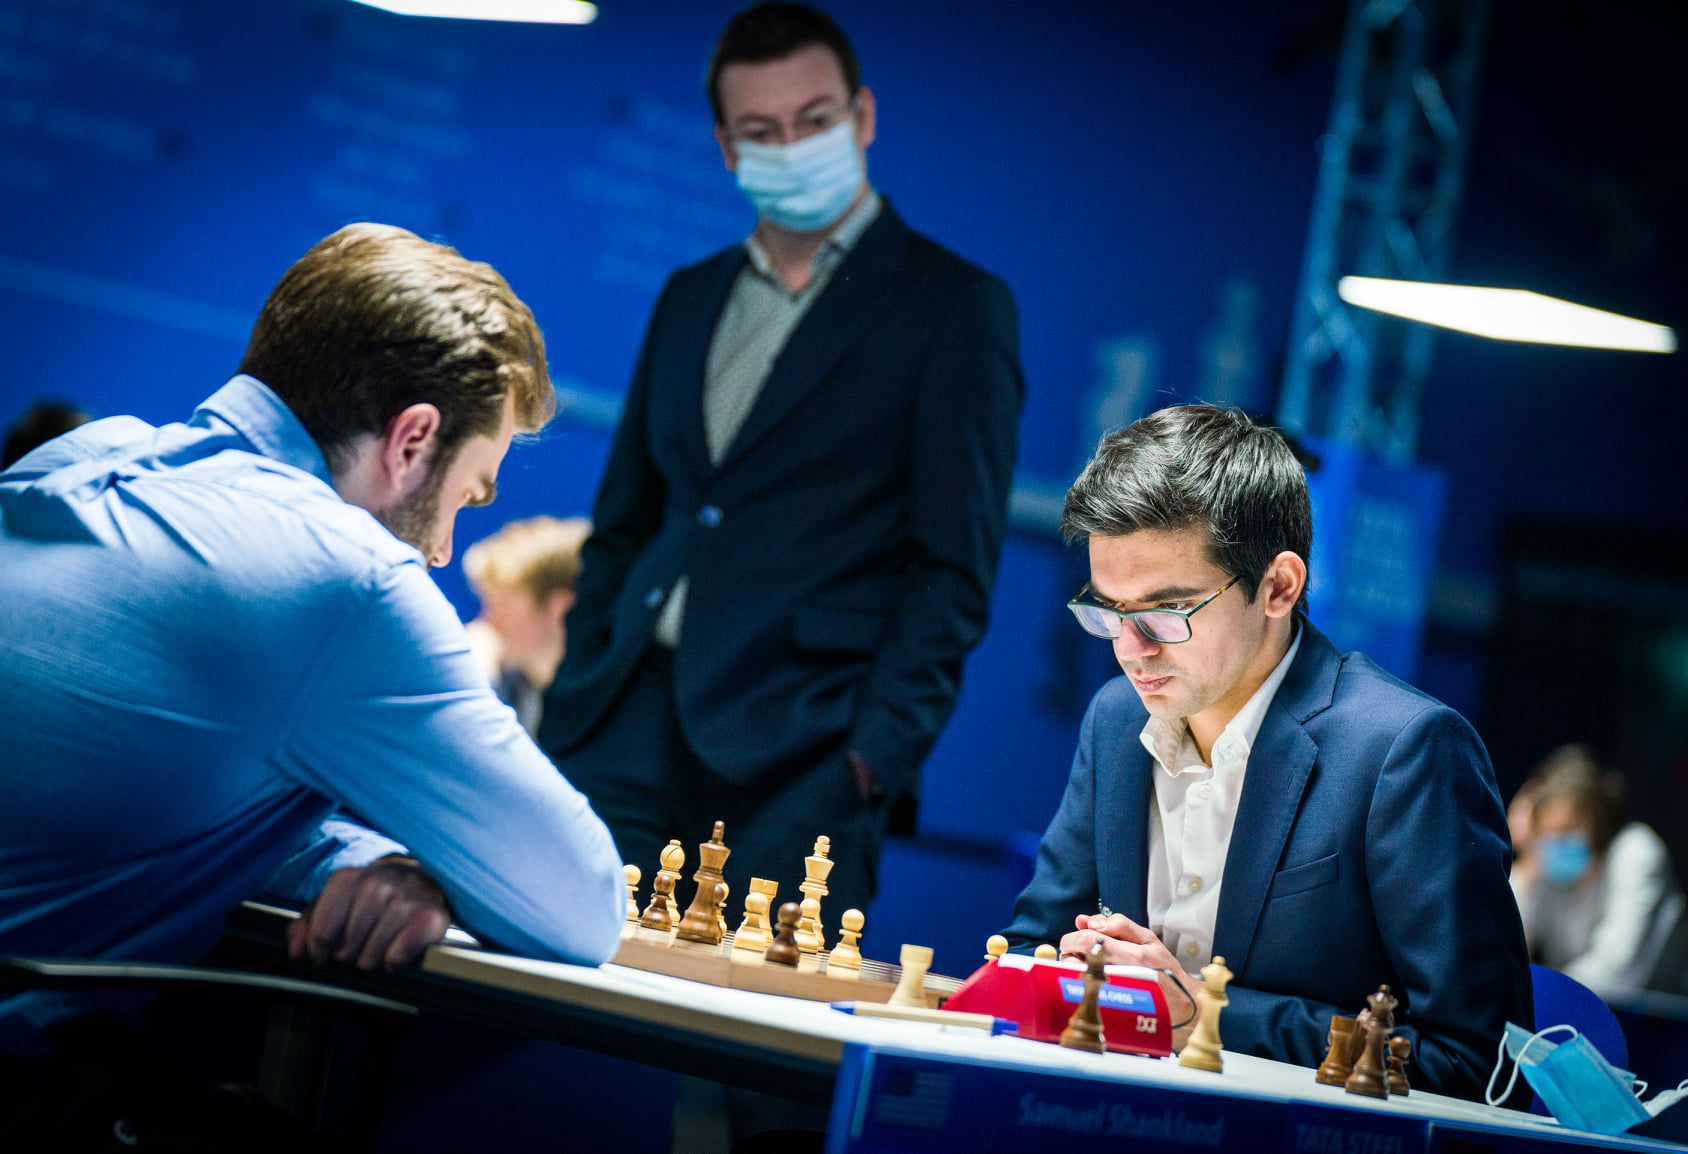 Tata Steel Chess on X: ♟ After playing in the Challengers in